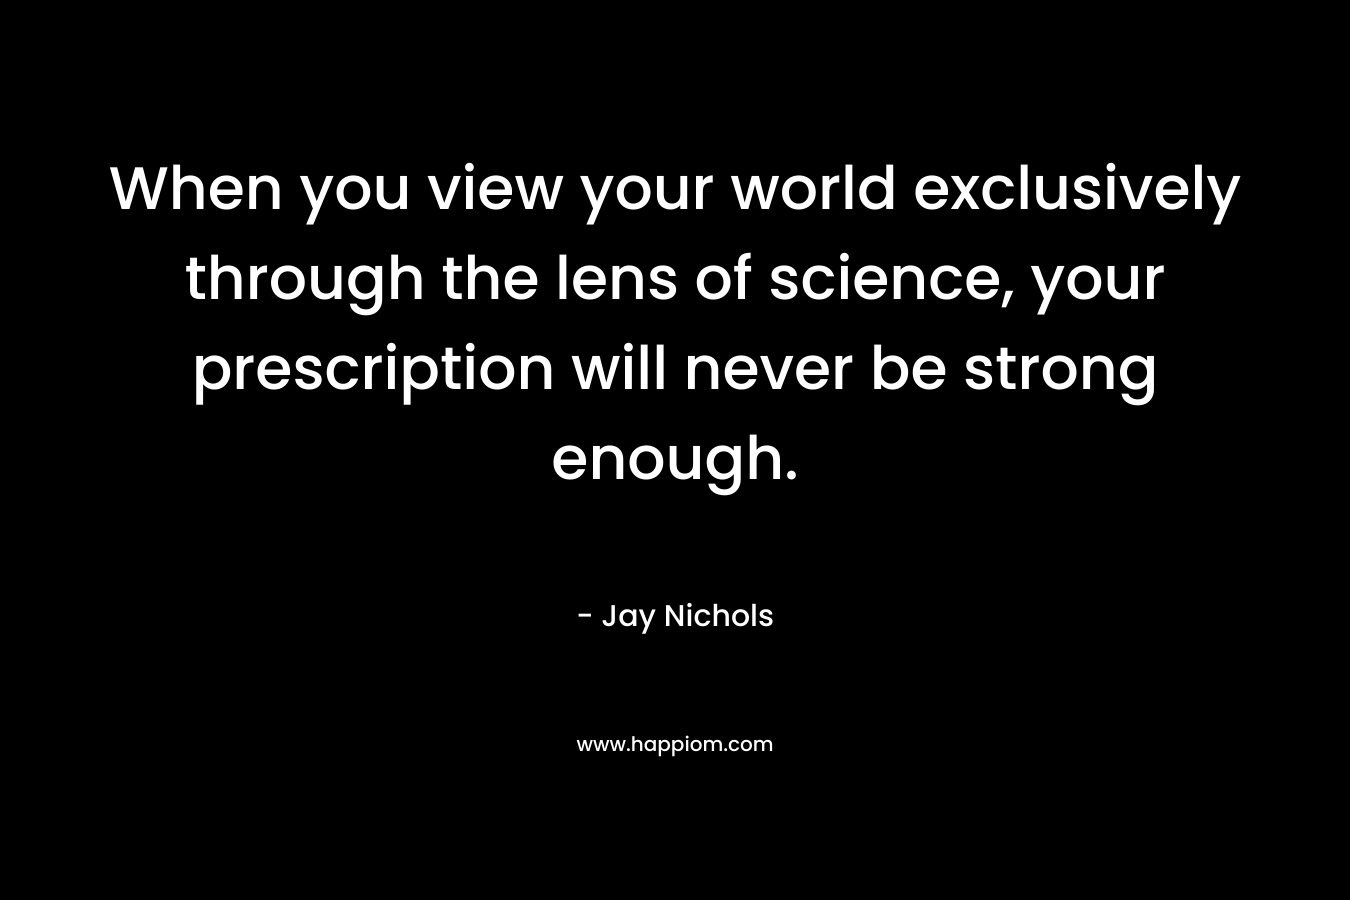 When you view your world exclusively through the lens of science, your prescription will never be strong enough.